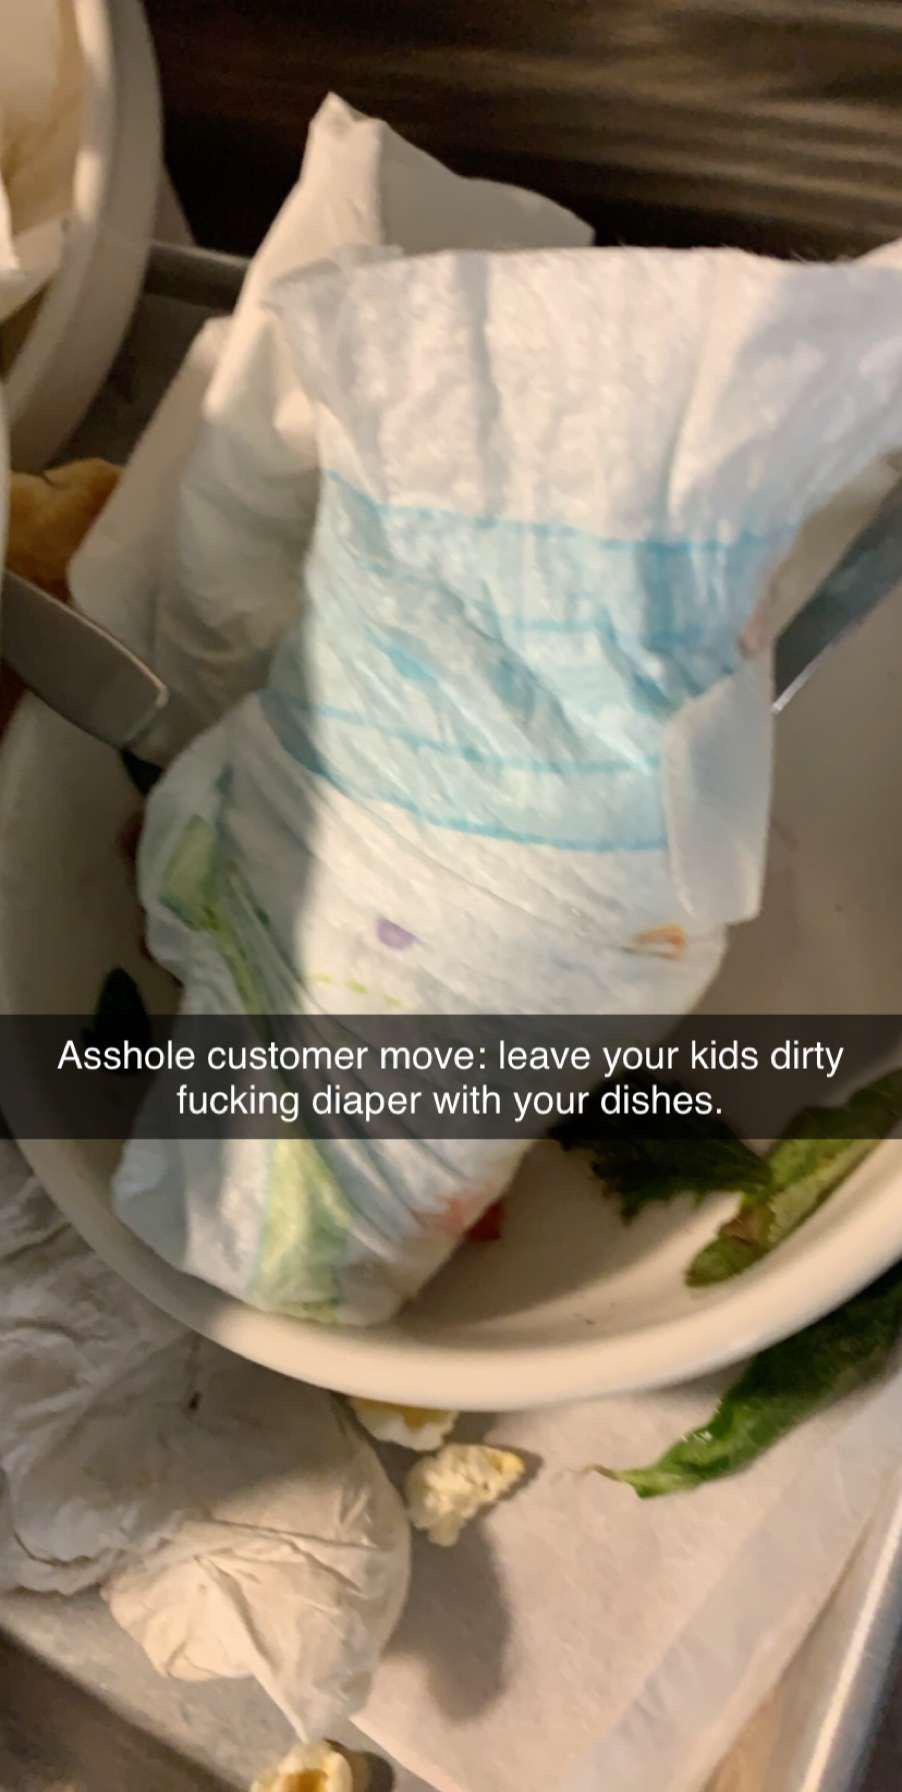 Asshole customer move leave your kids dirty fucking diaper with your dishes.